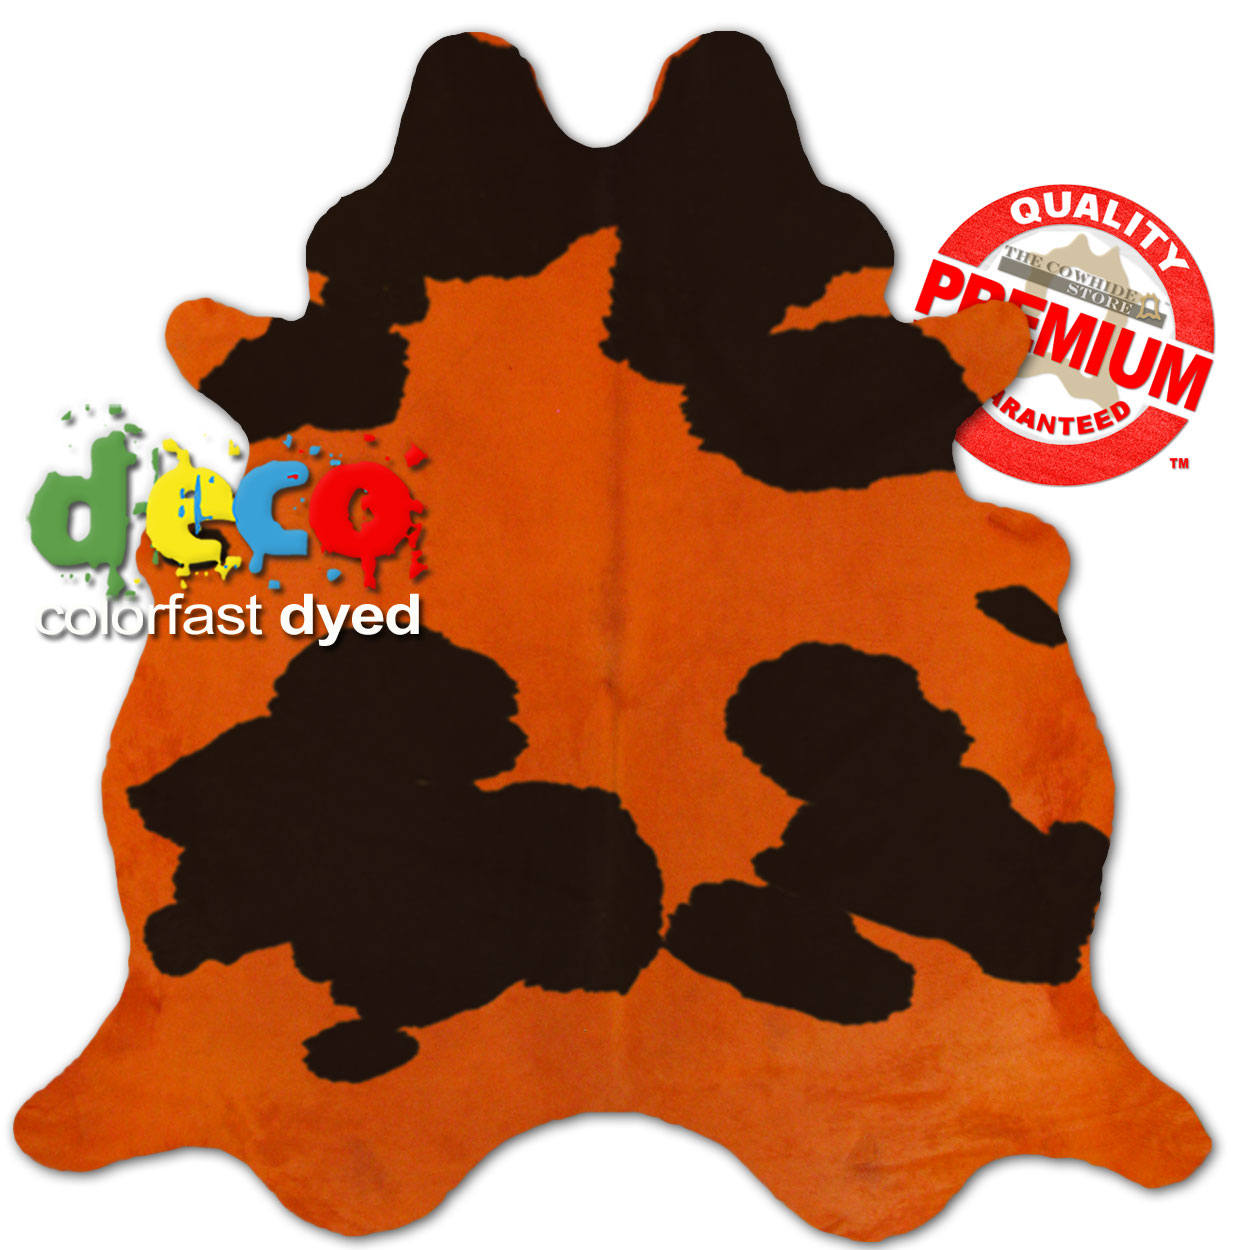 322524 - Colorfast Dyed Spotted on Orange Cowhide - Choose Size